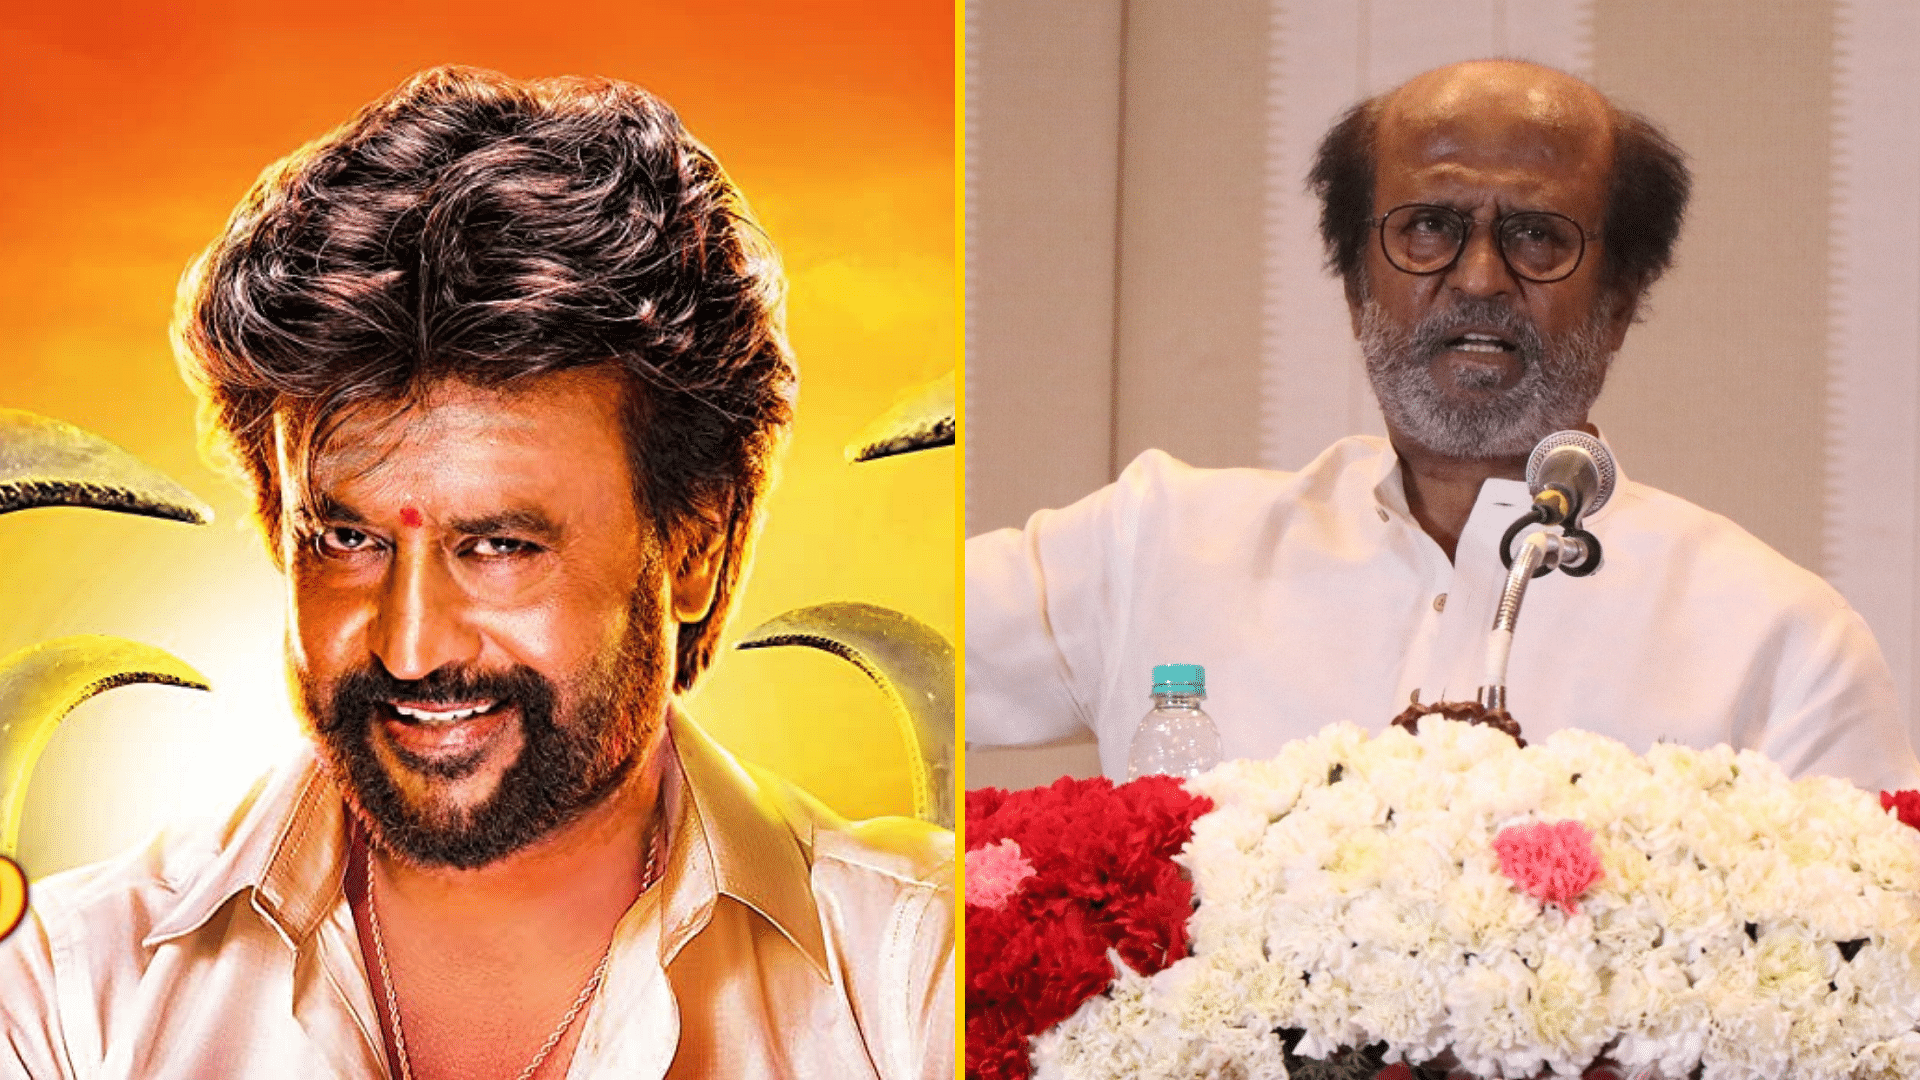 Filming of Rajinikanth's <i>Annaatthe</i> has been halted due to COVID-19.